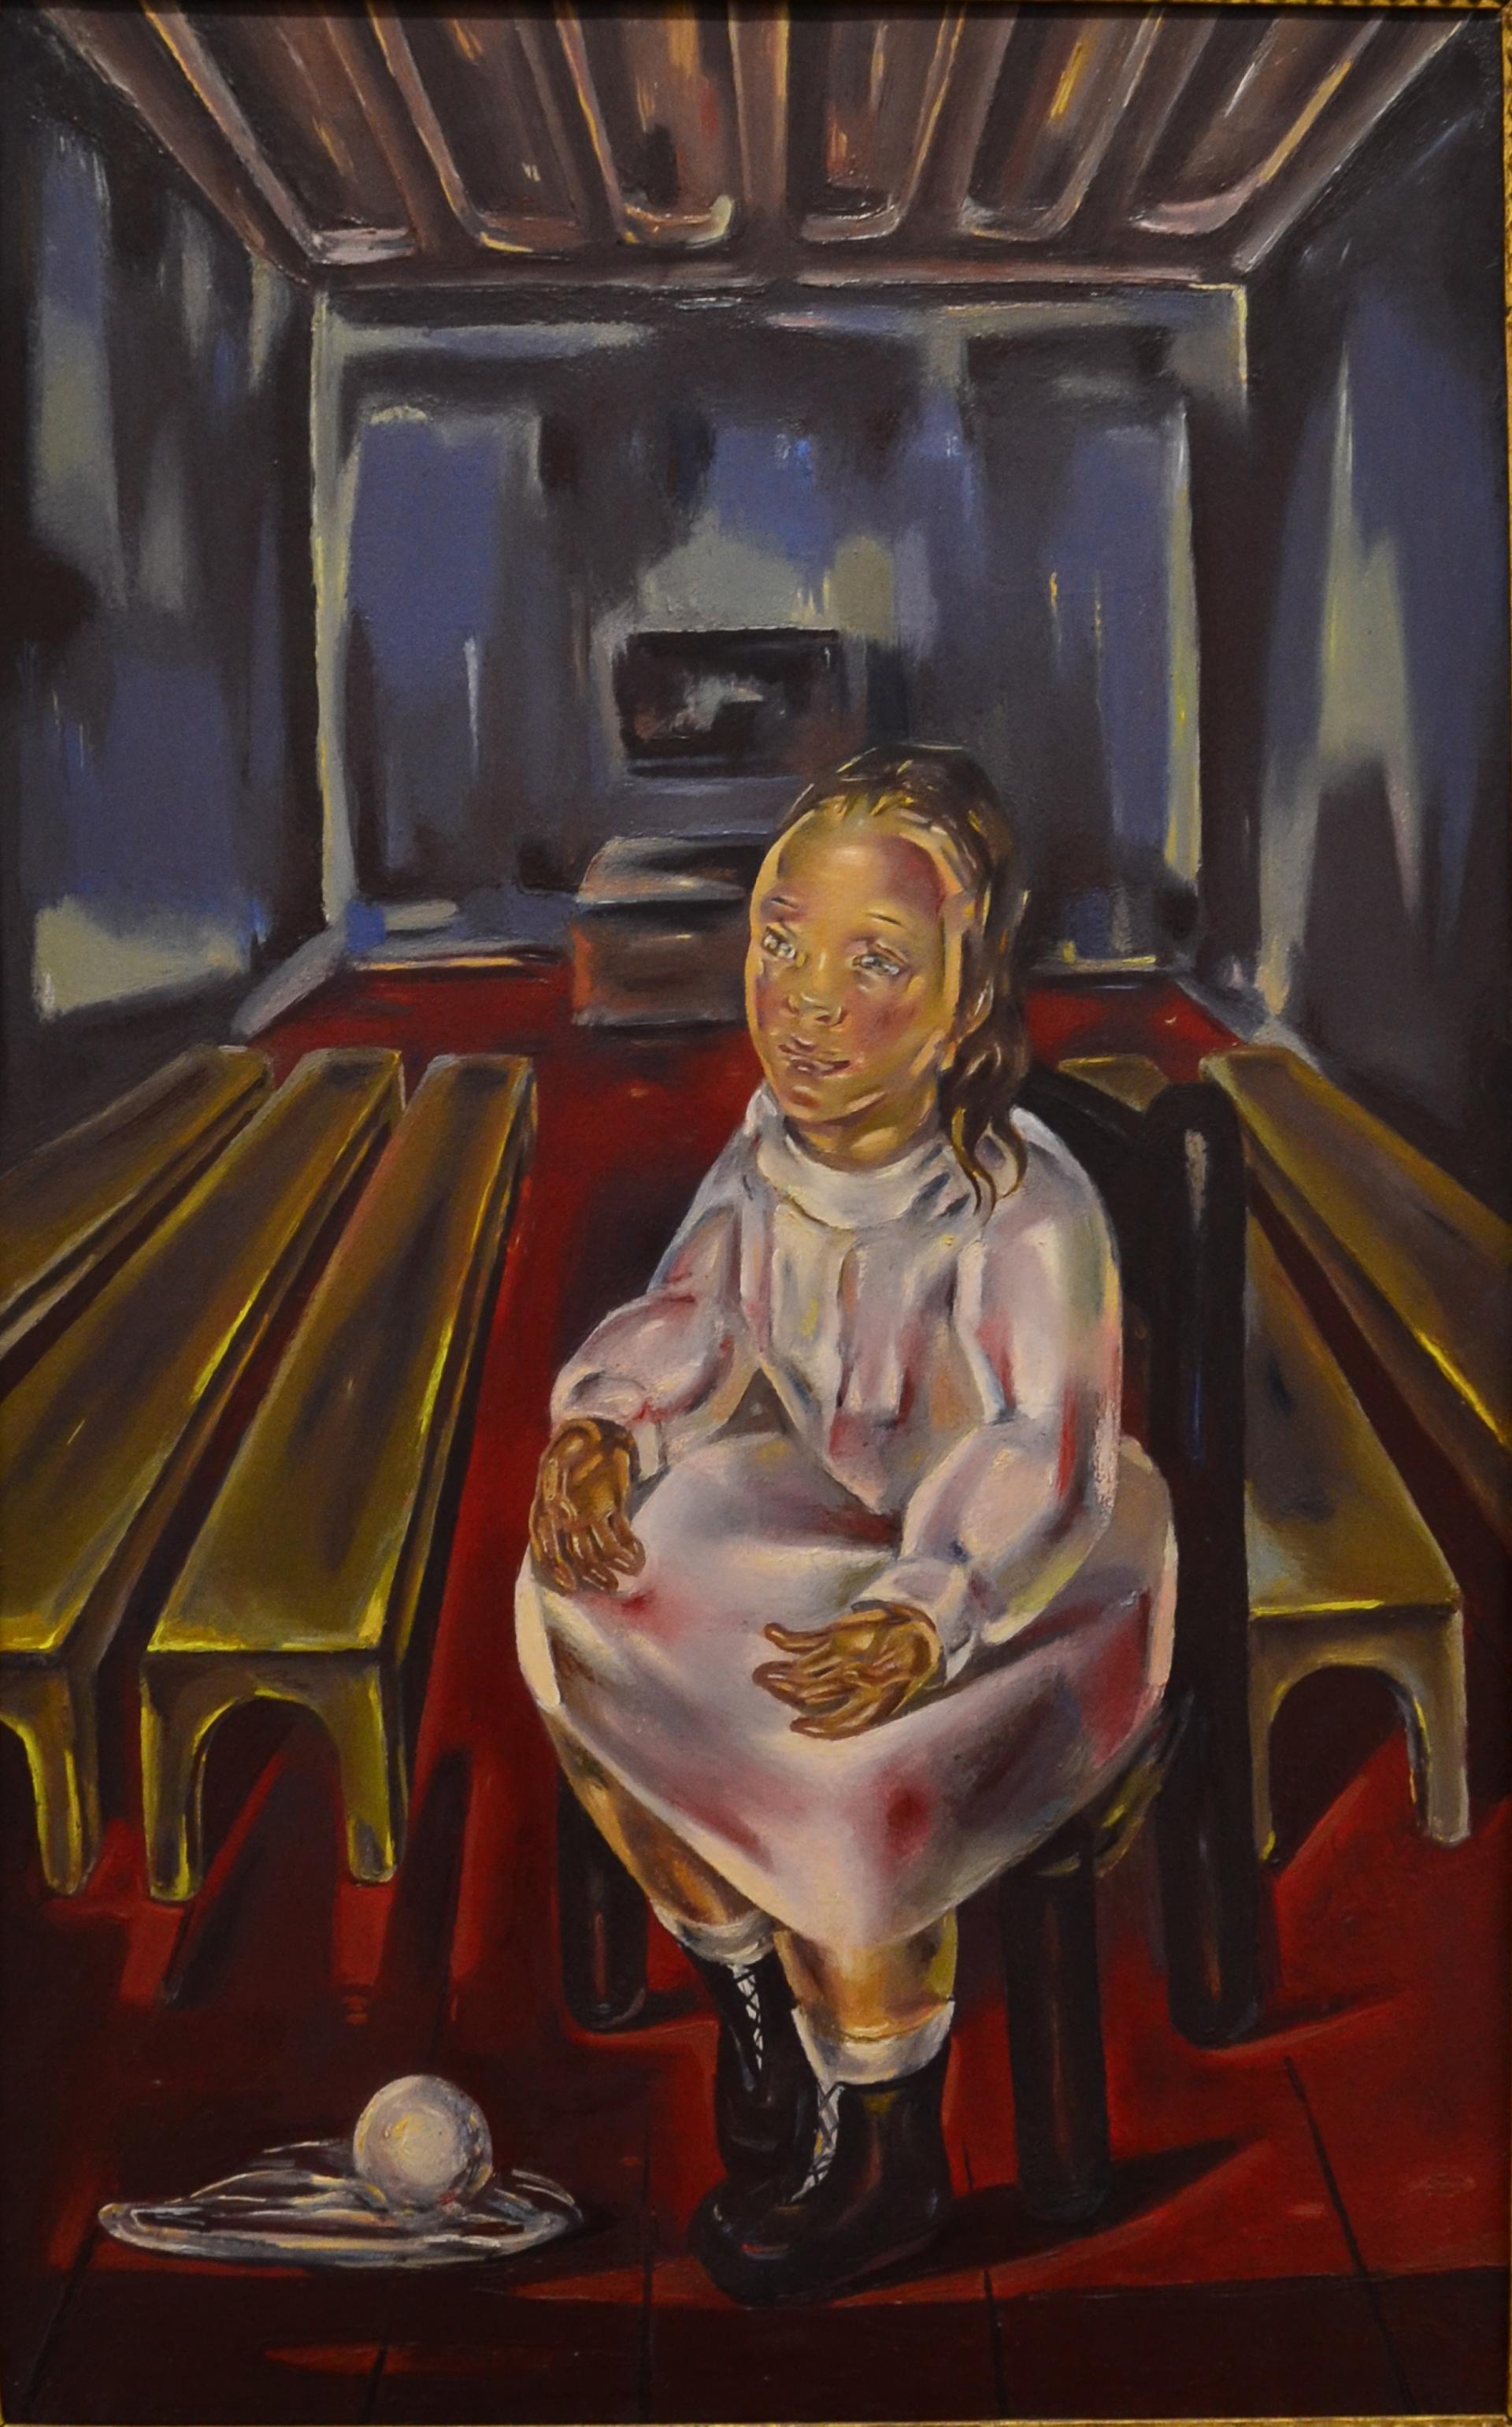 María Blanchard (1881-1932), “Seated Girl (in the bench room),” oil on canvas, 1925. Acquired at public sale in 1954.